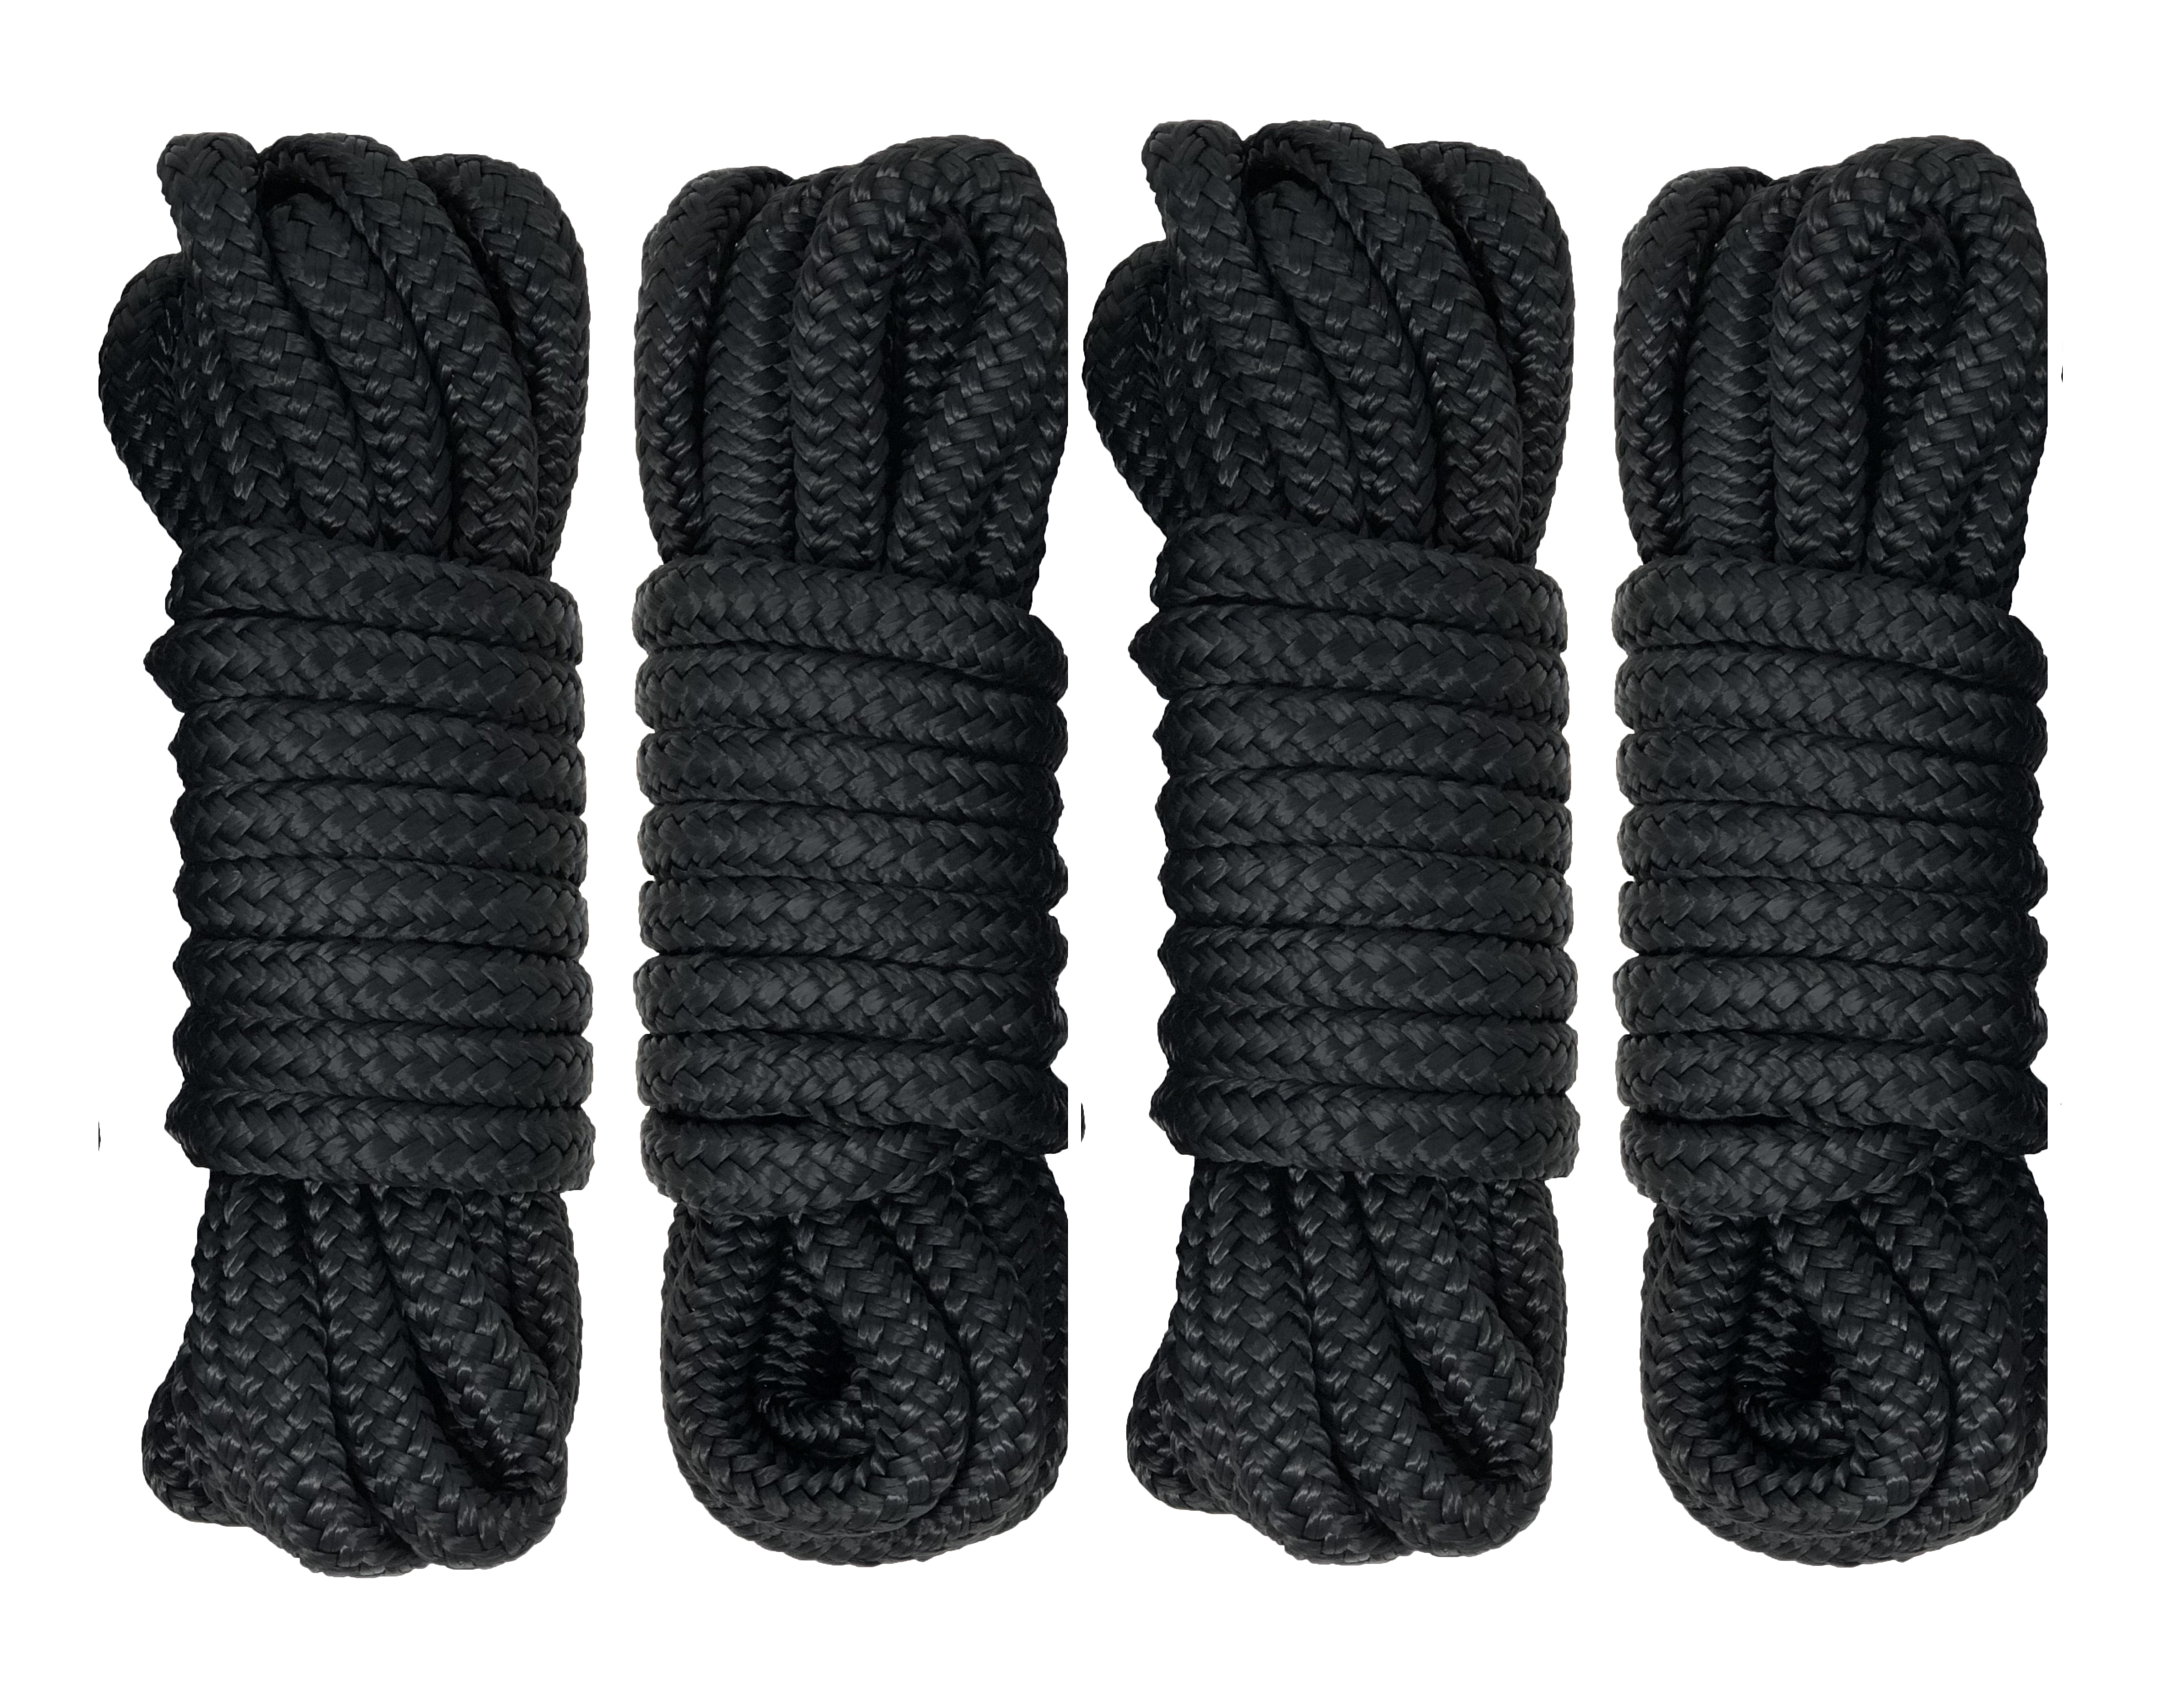 Five Oceans 4-Pack 1/2 inch x 15' Boat Dock Lines with 12 inch Eyelet, Marine-Grade Black Premium Double Braided Nylon Boat Rope 1/2 inch, Boat Ropes